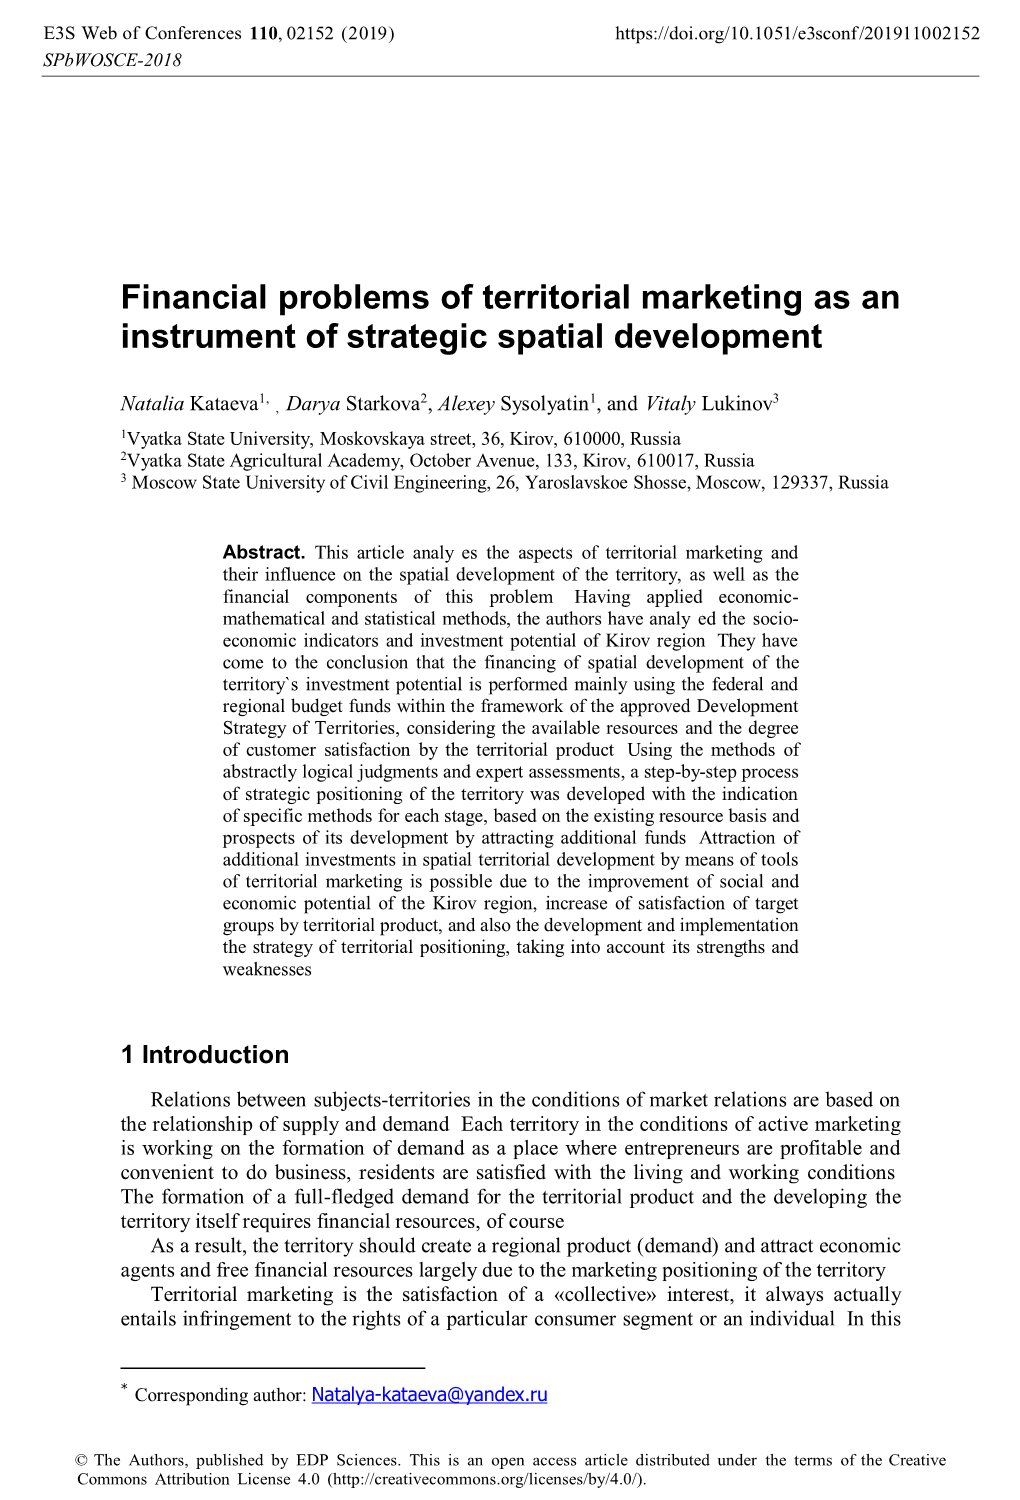 Financial Problems of Territorial Marketing As an Instrument of Strategic Spatial Development